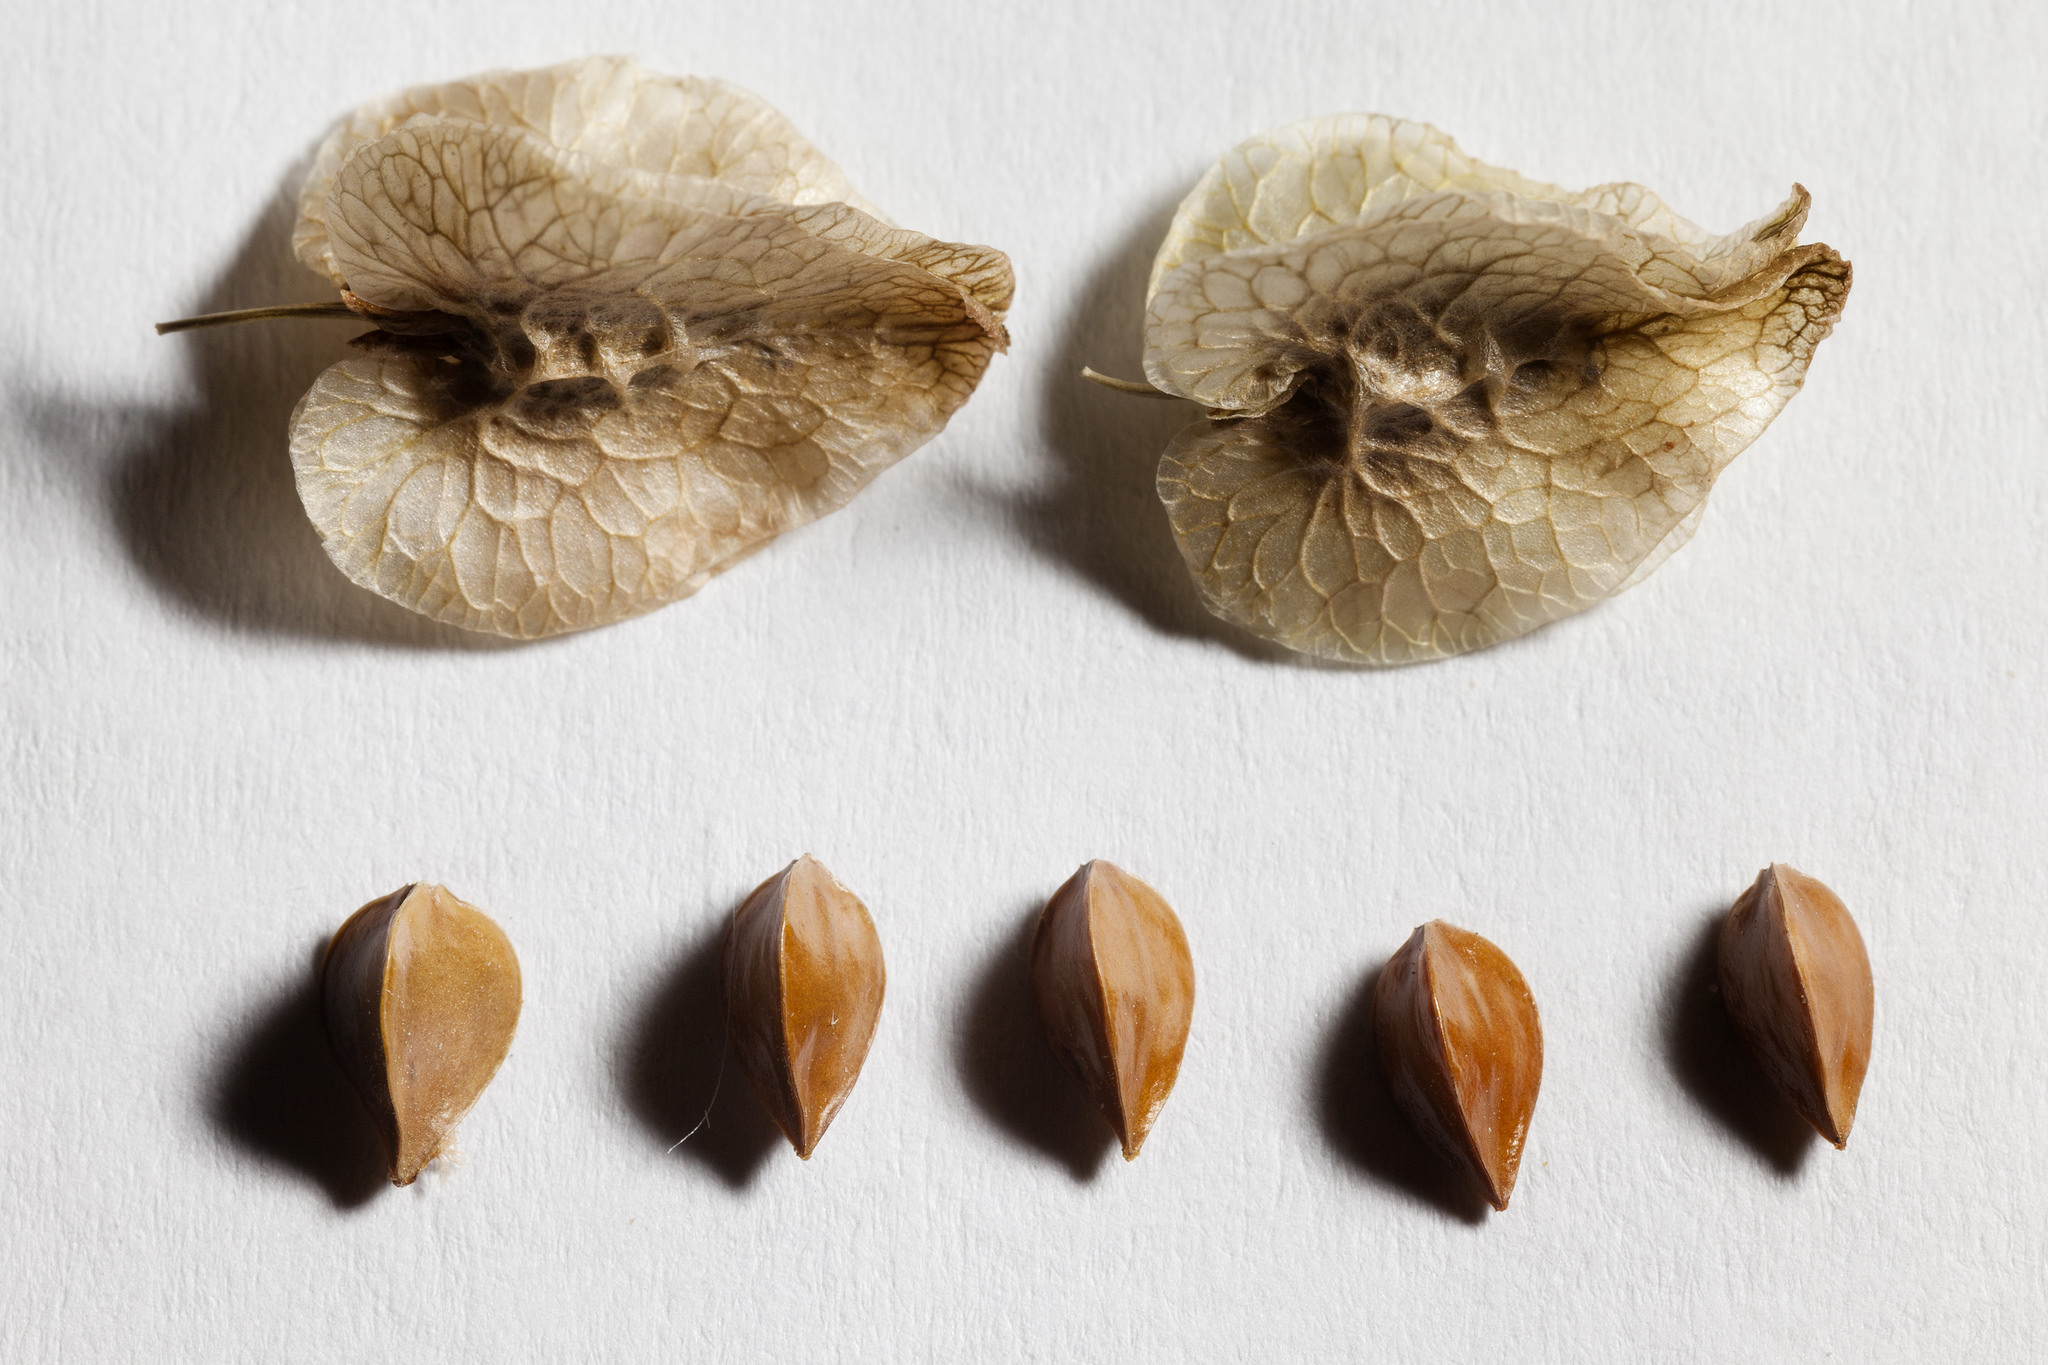 Seeds, which have a papery covering formed from the dried sepals of the flower